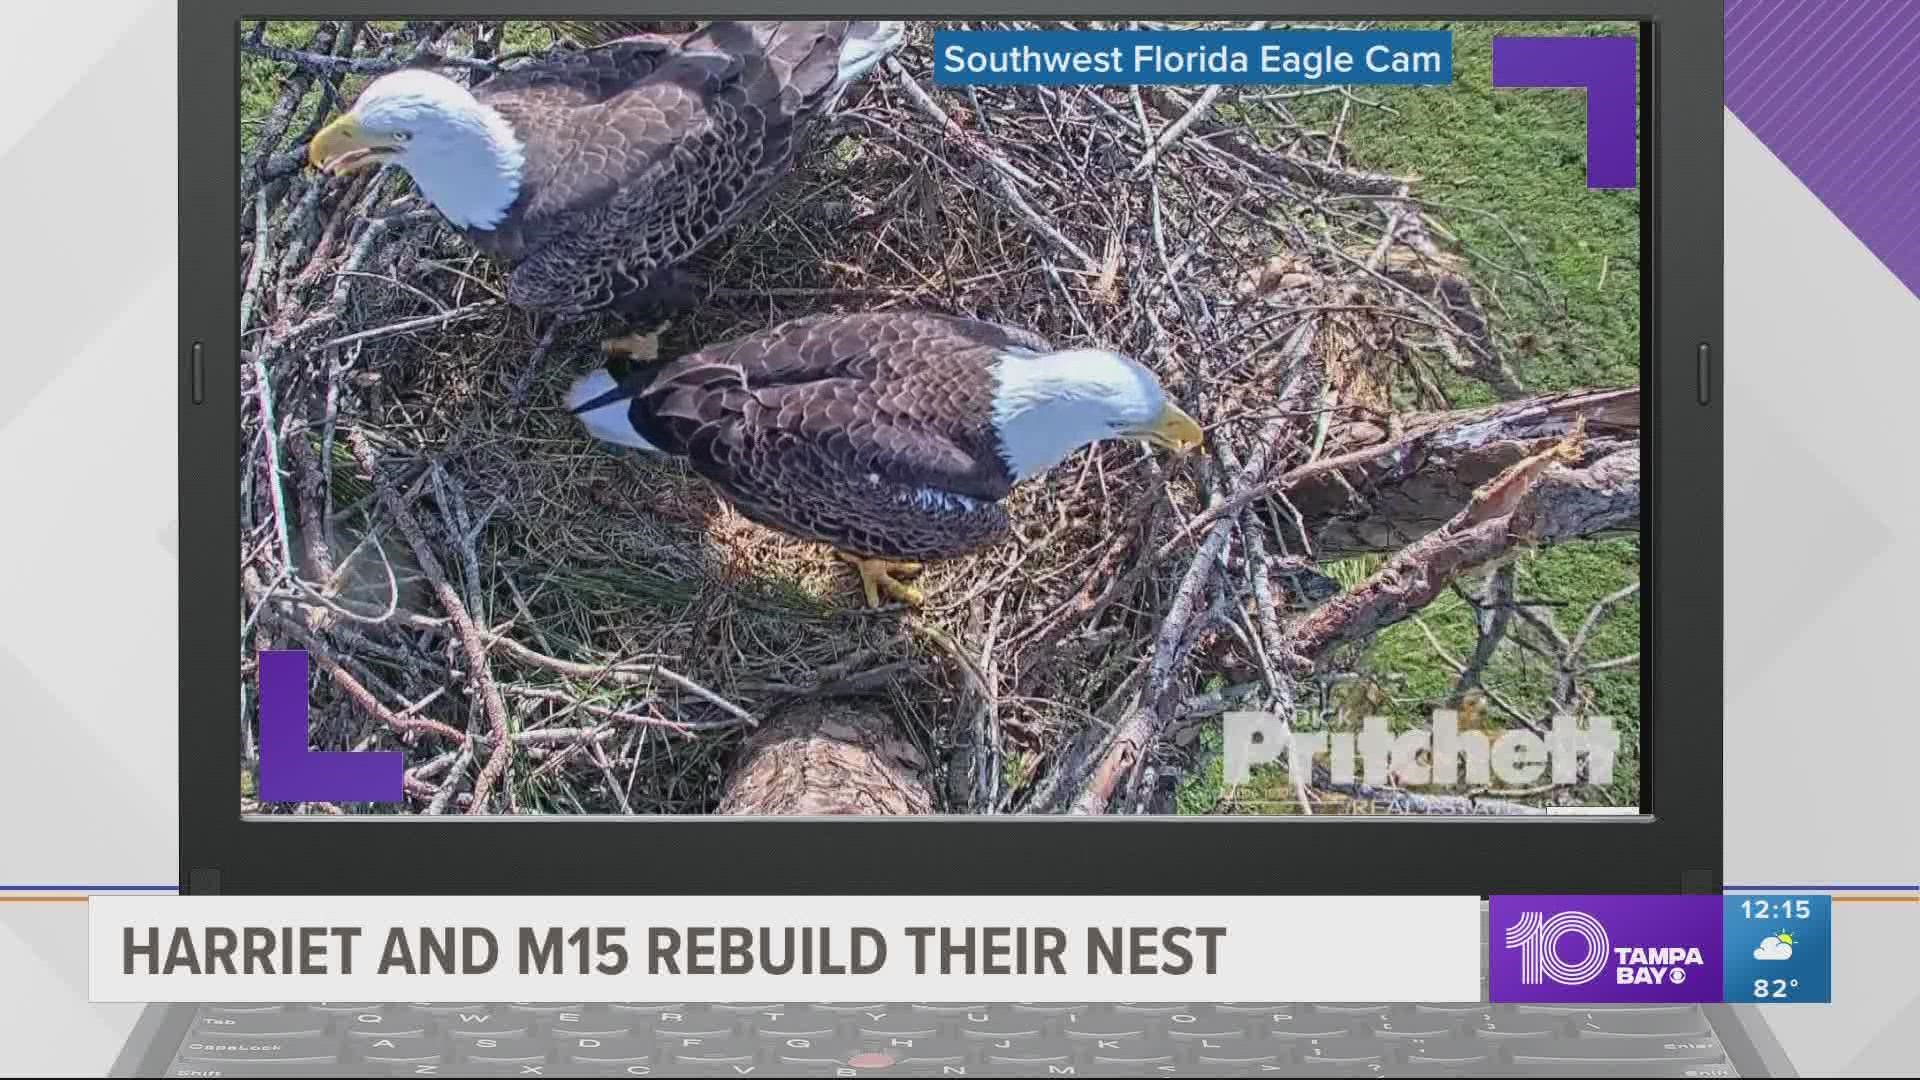 Harriet and M15 are putting back the pieces of their nest stick-by-stick.